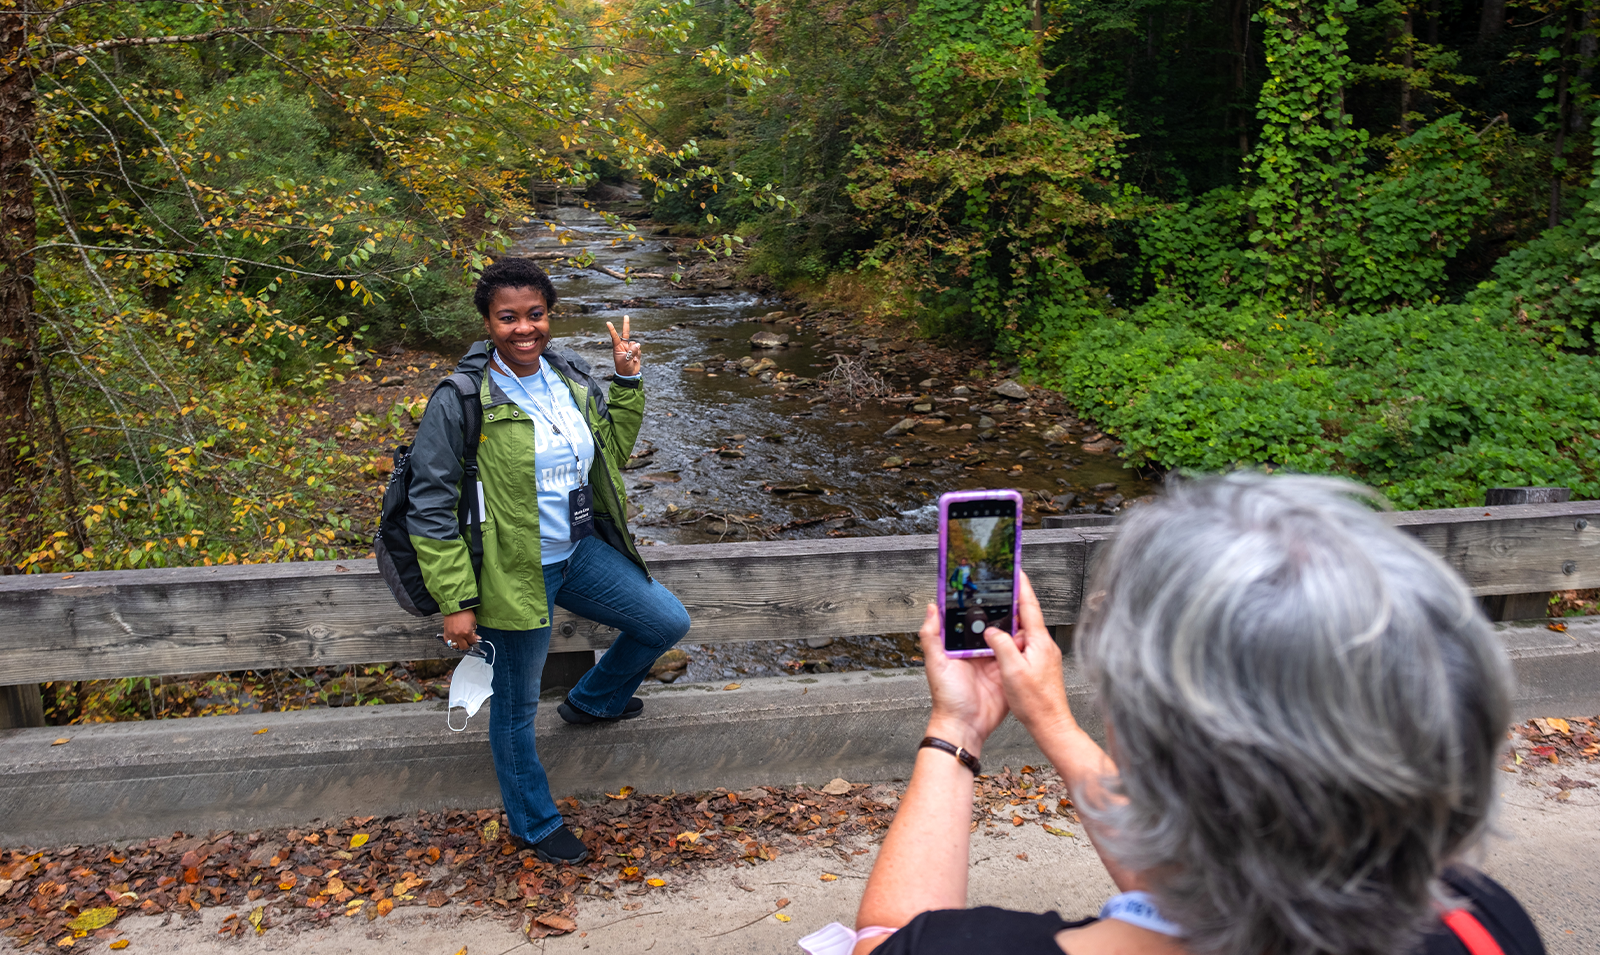 A woman posing for a photo with a peace sign in front of a forested waterway, as another woman takes her picture with an iPhone.